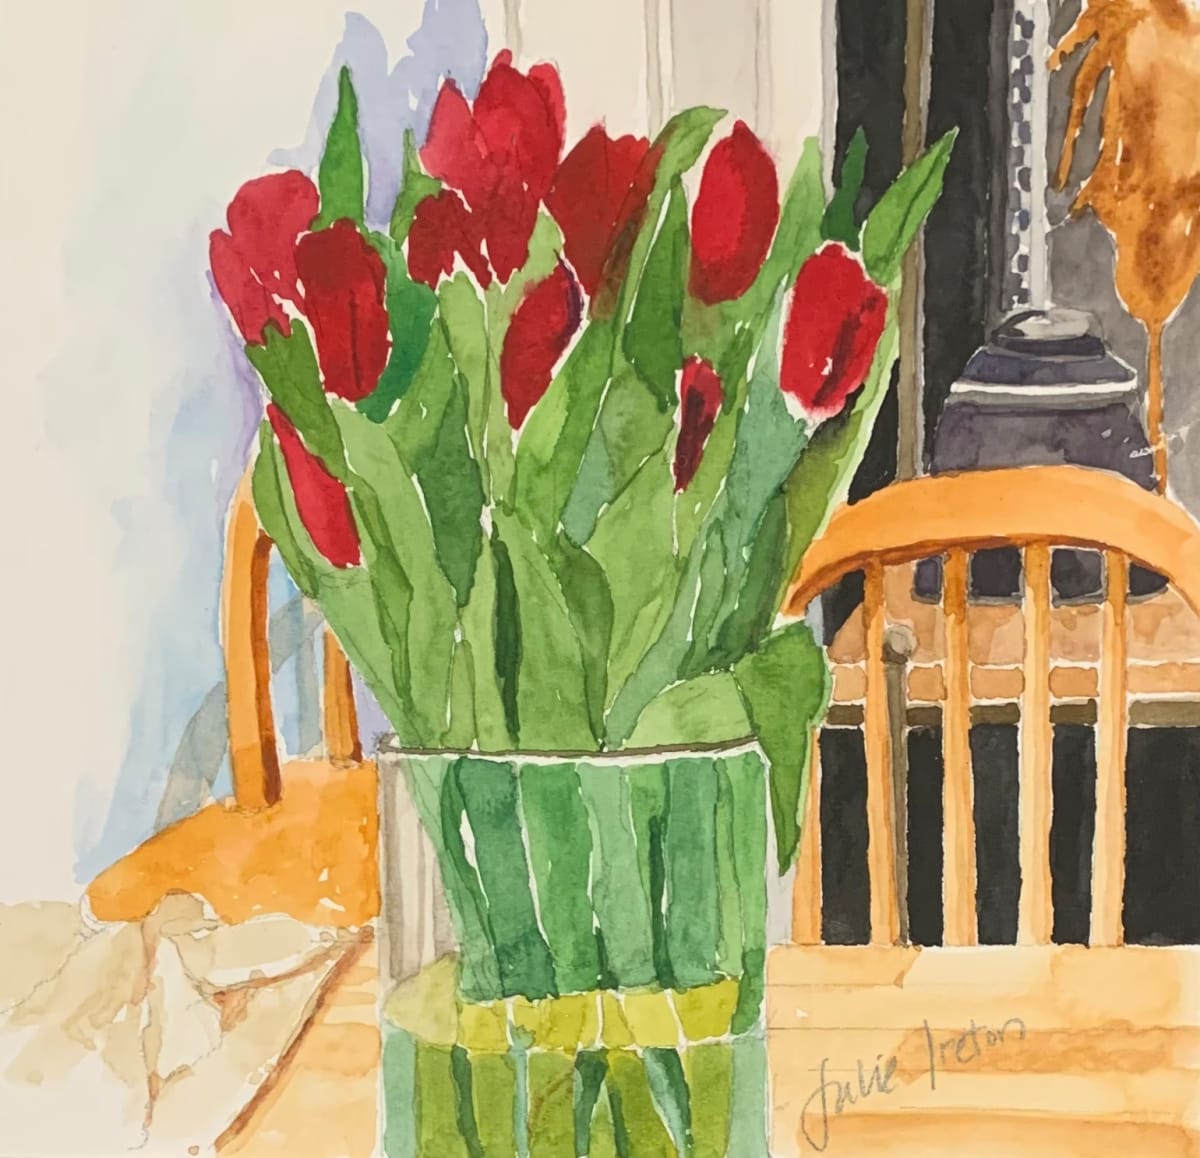 My Kitchen Table by Julie Ireton  Image: Red tulips on a winter evening.